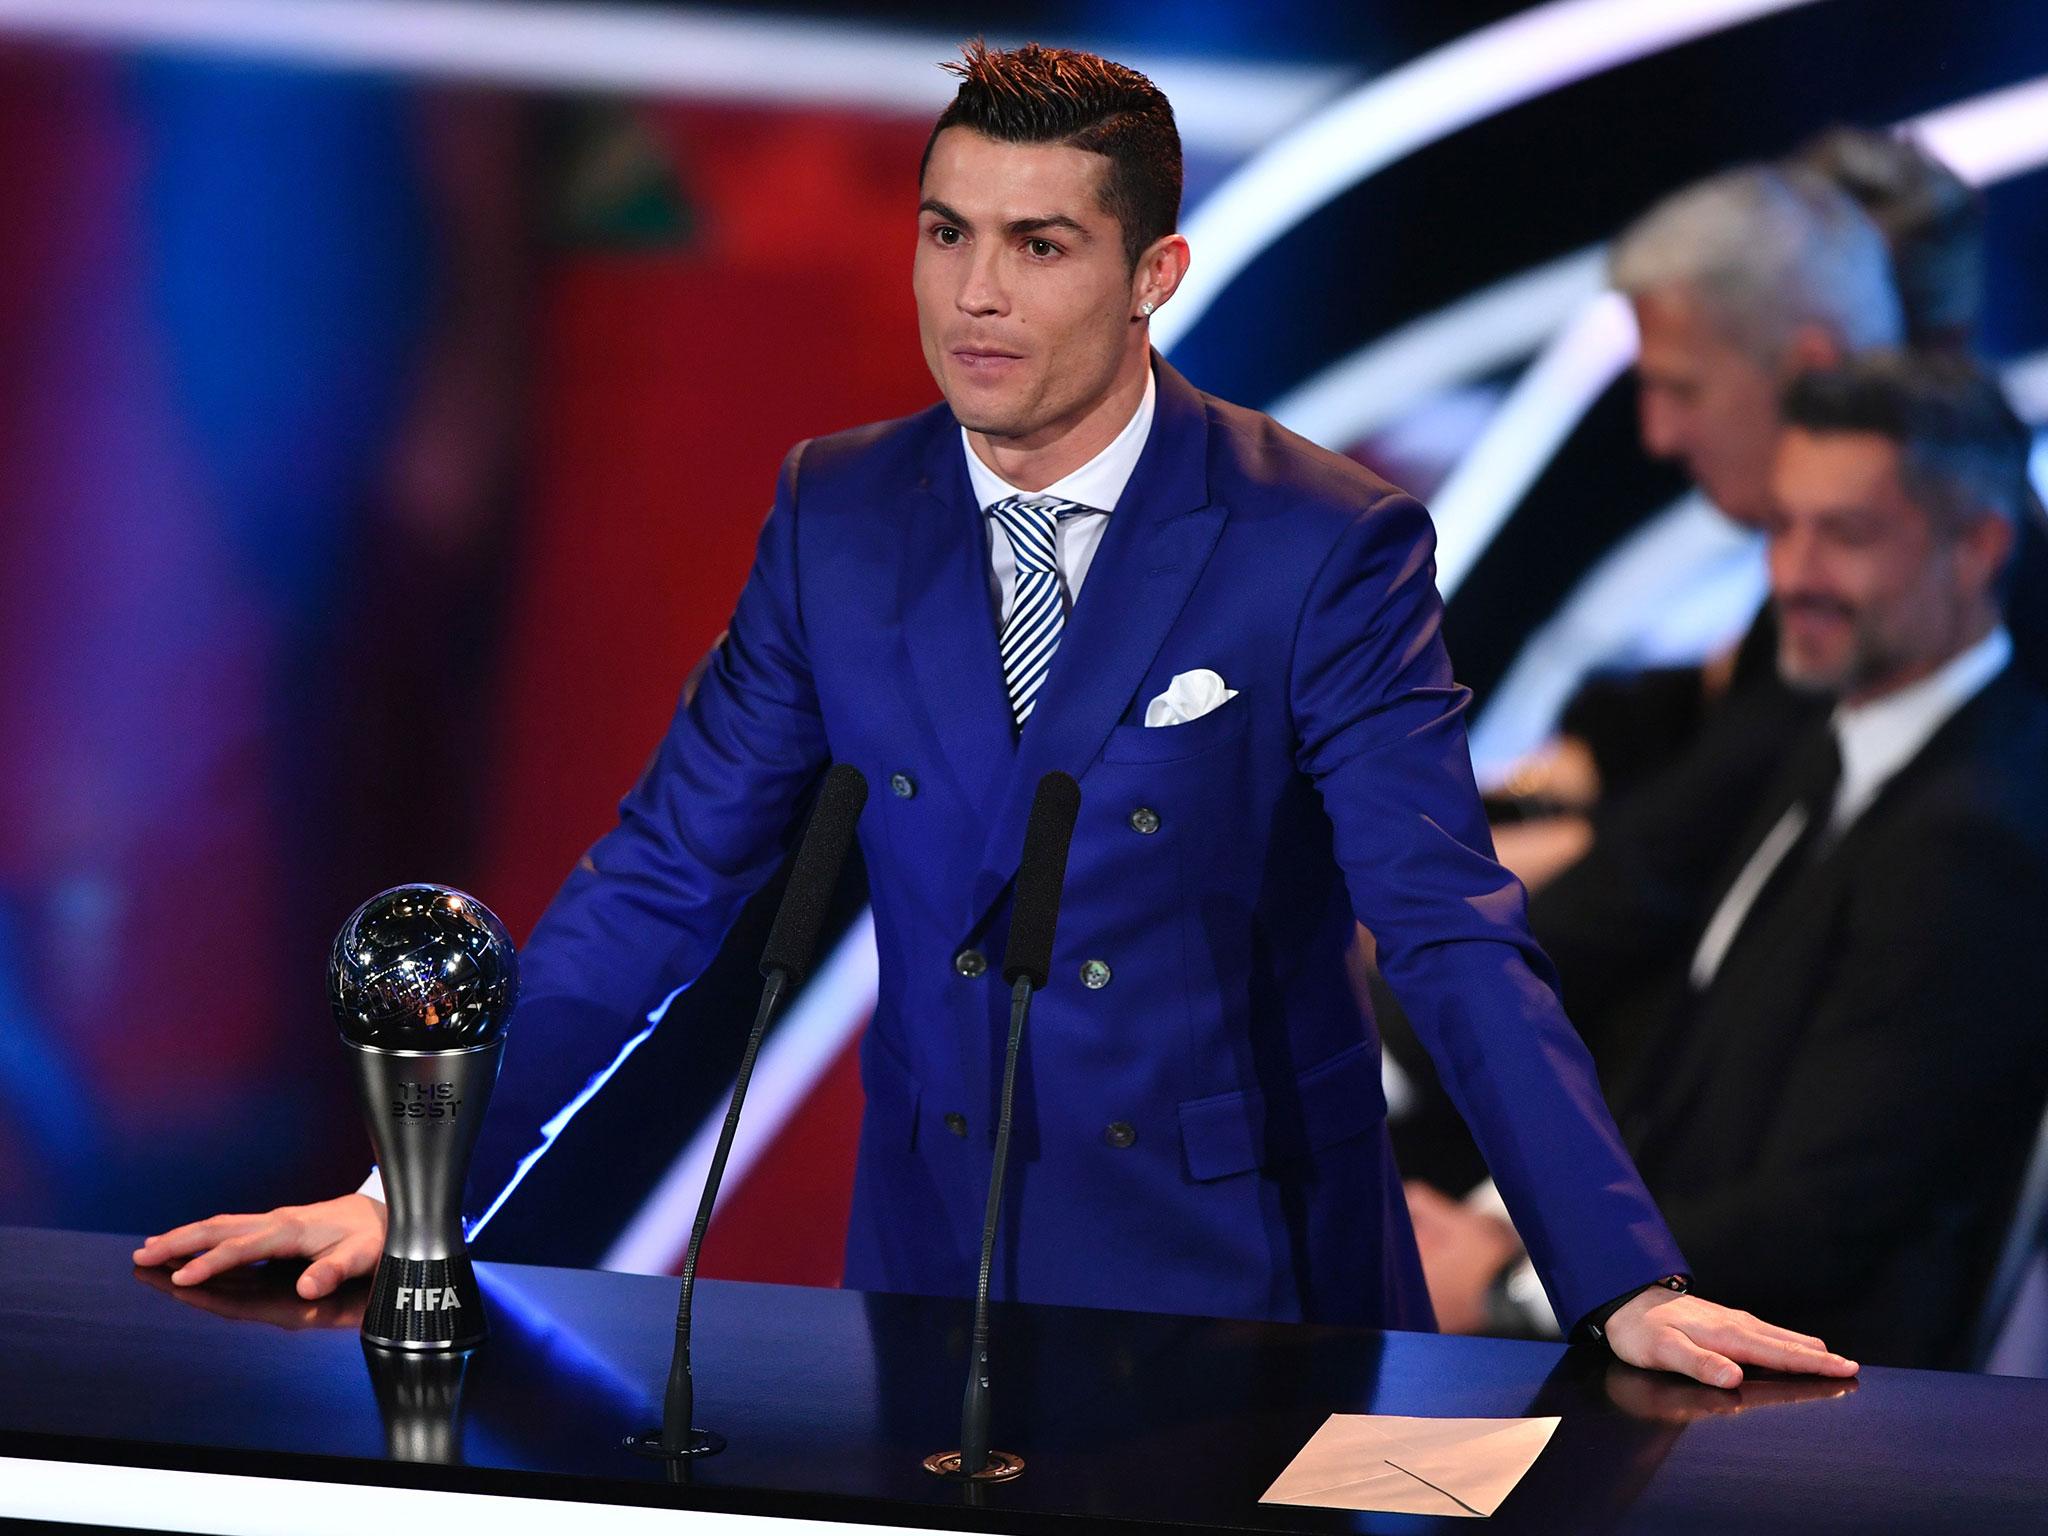 Cristiano Ronaldo collected the Fifa Best Player Award on Monday